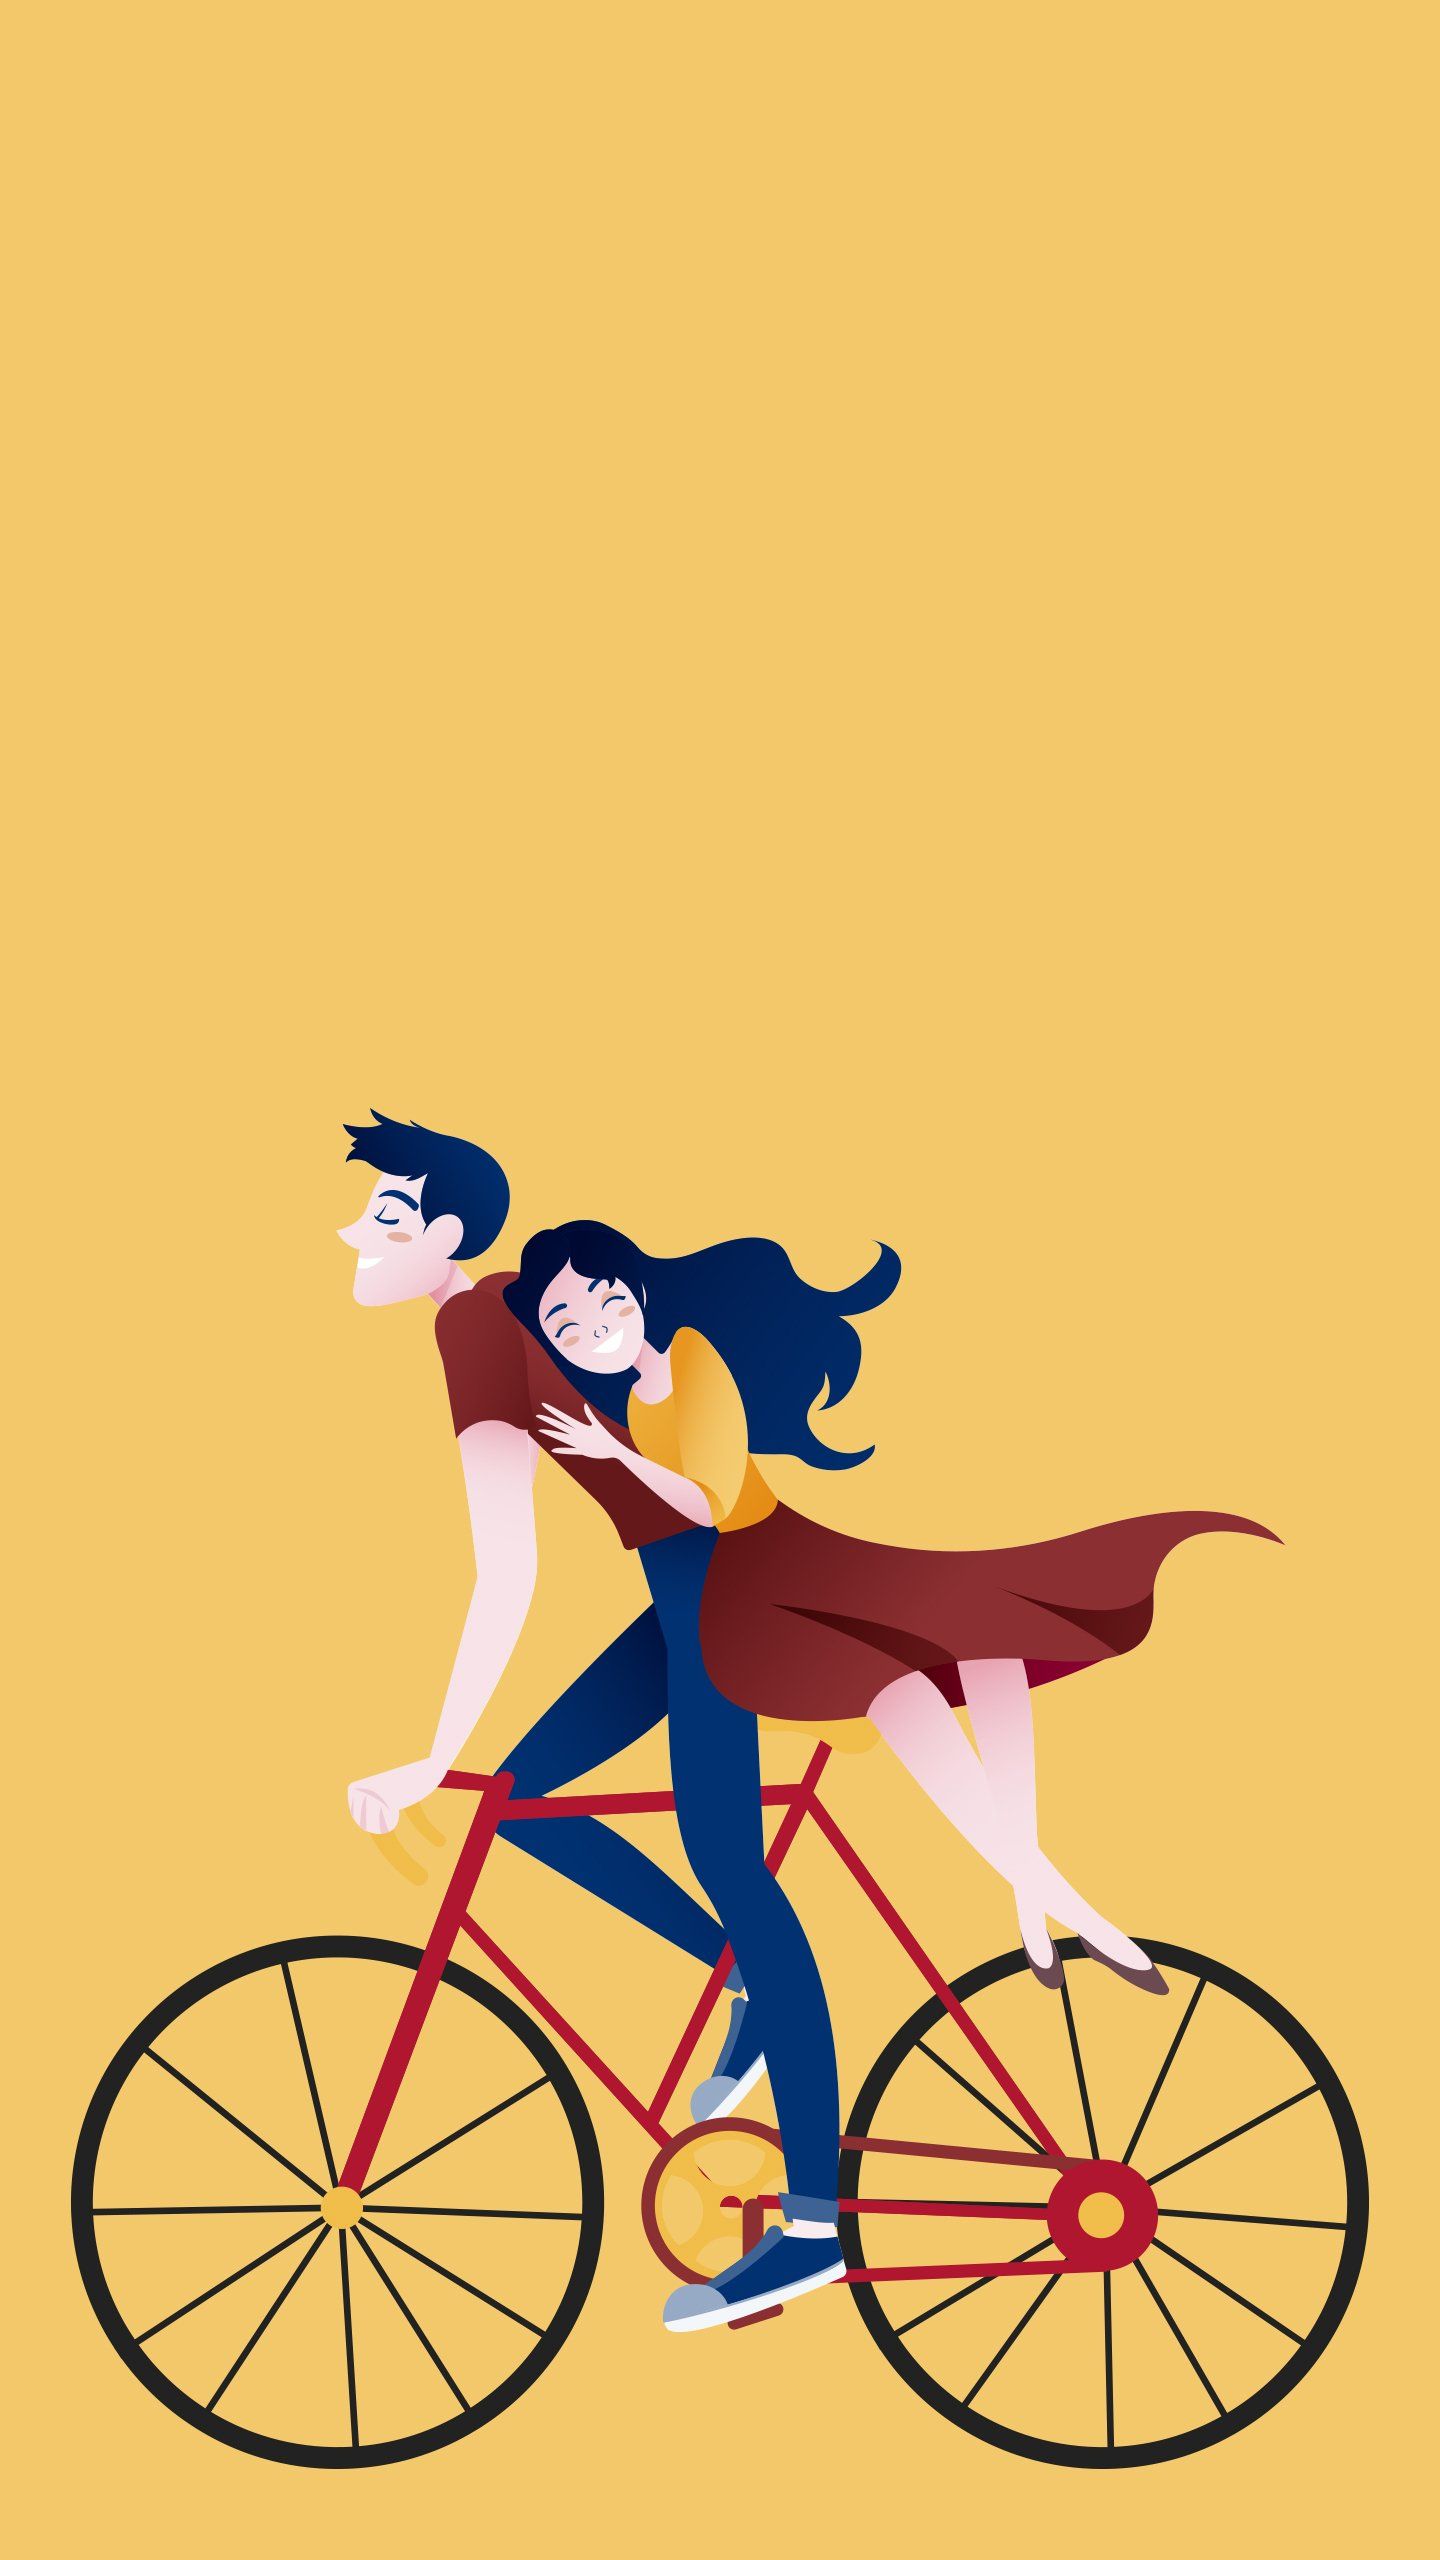 Couple Cycle Riding Wallpaper